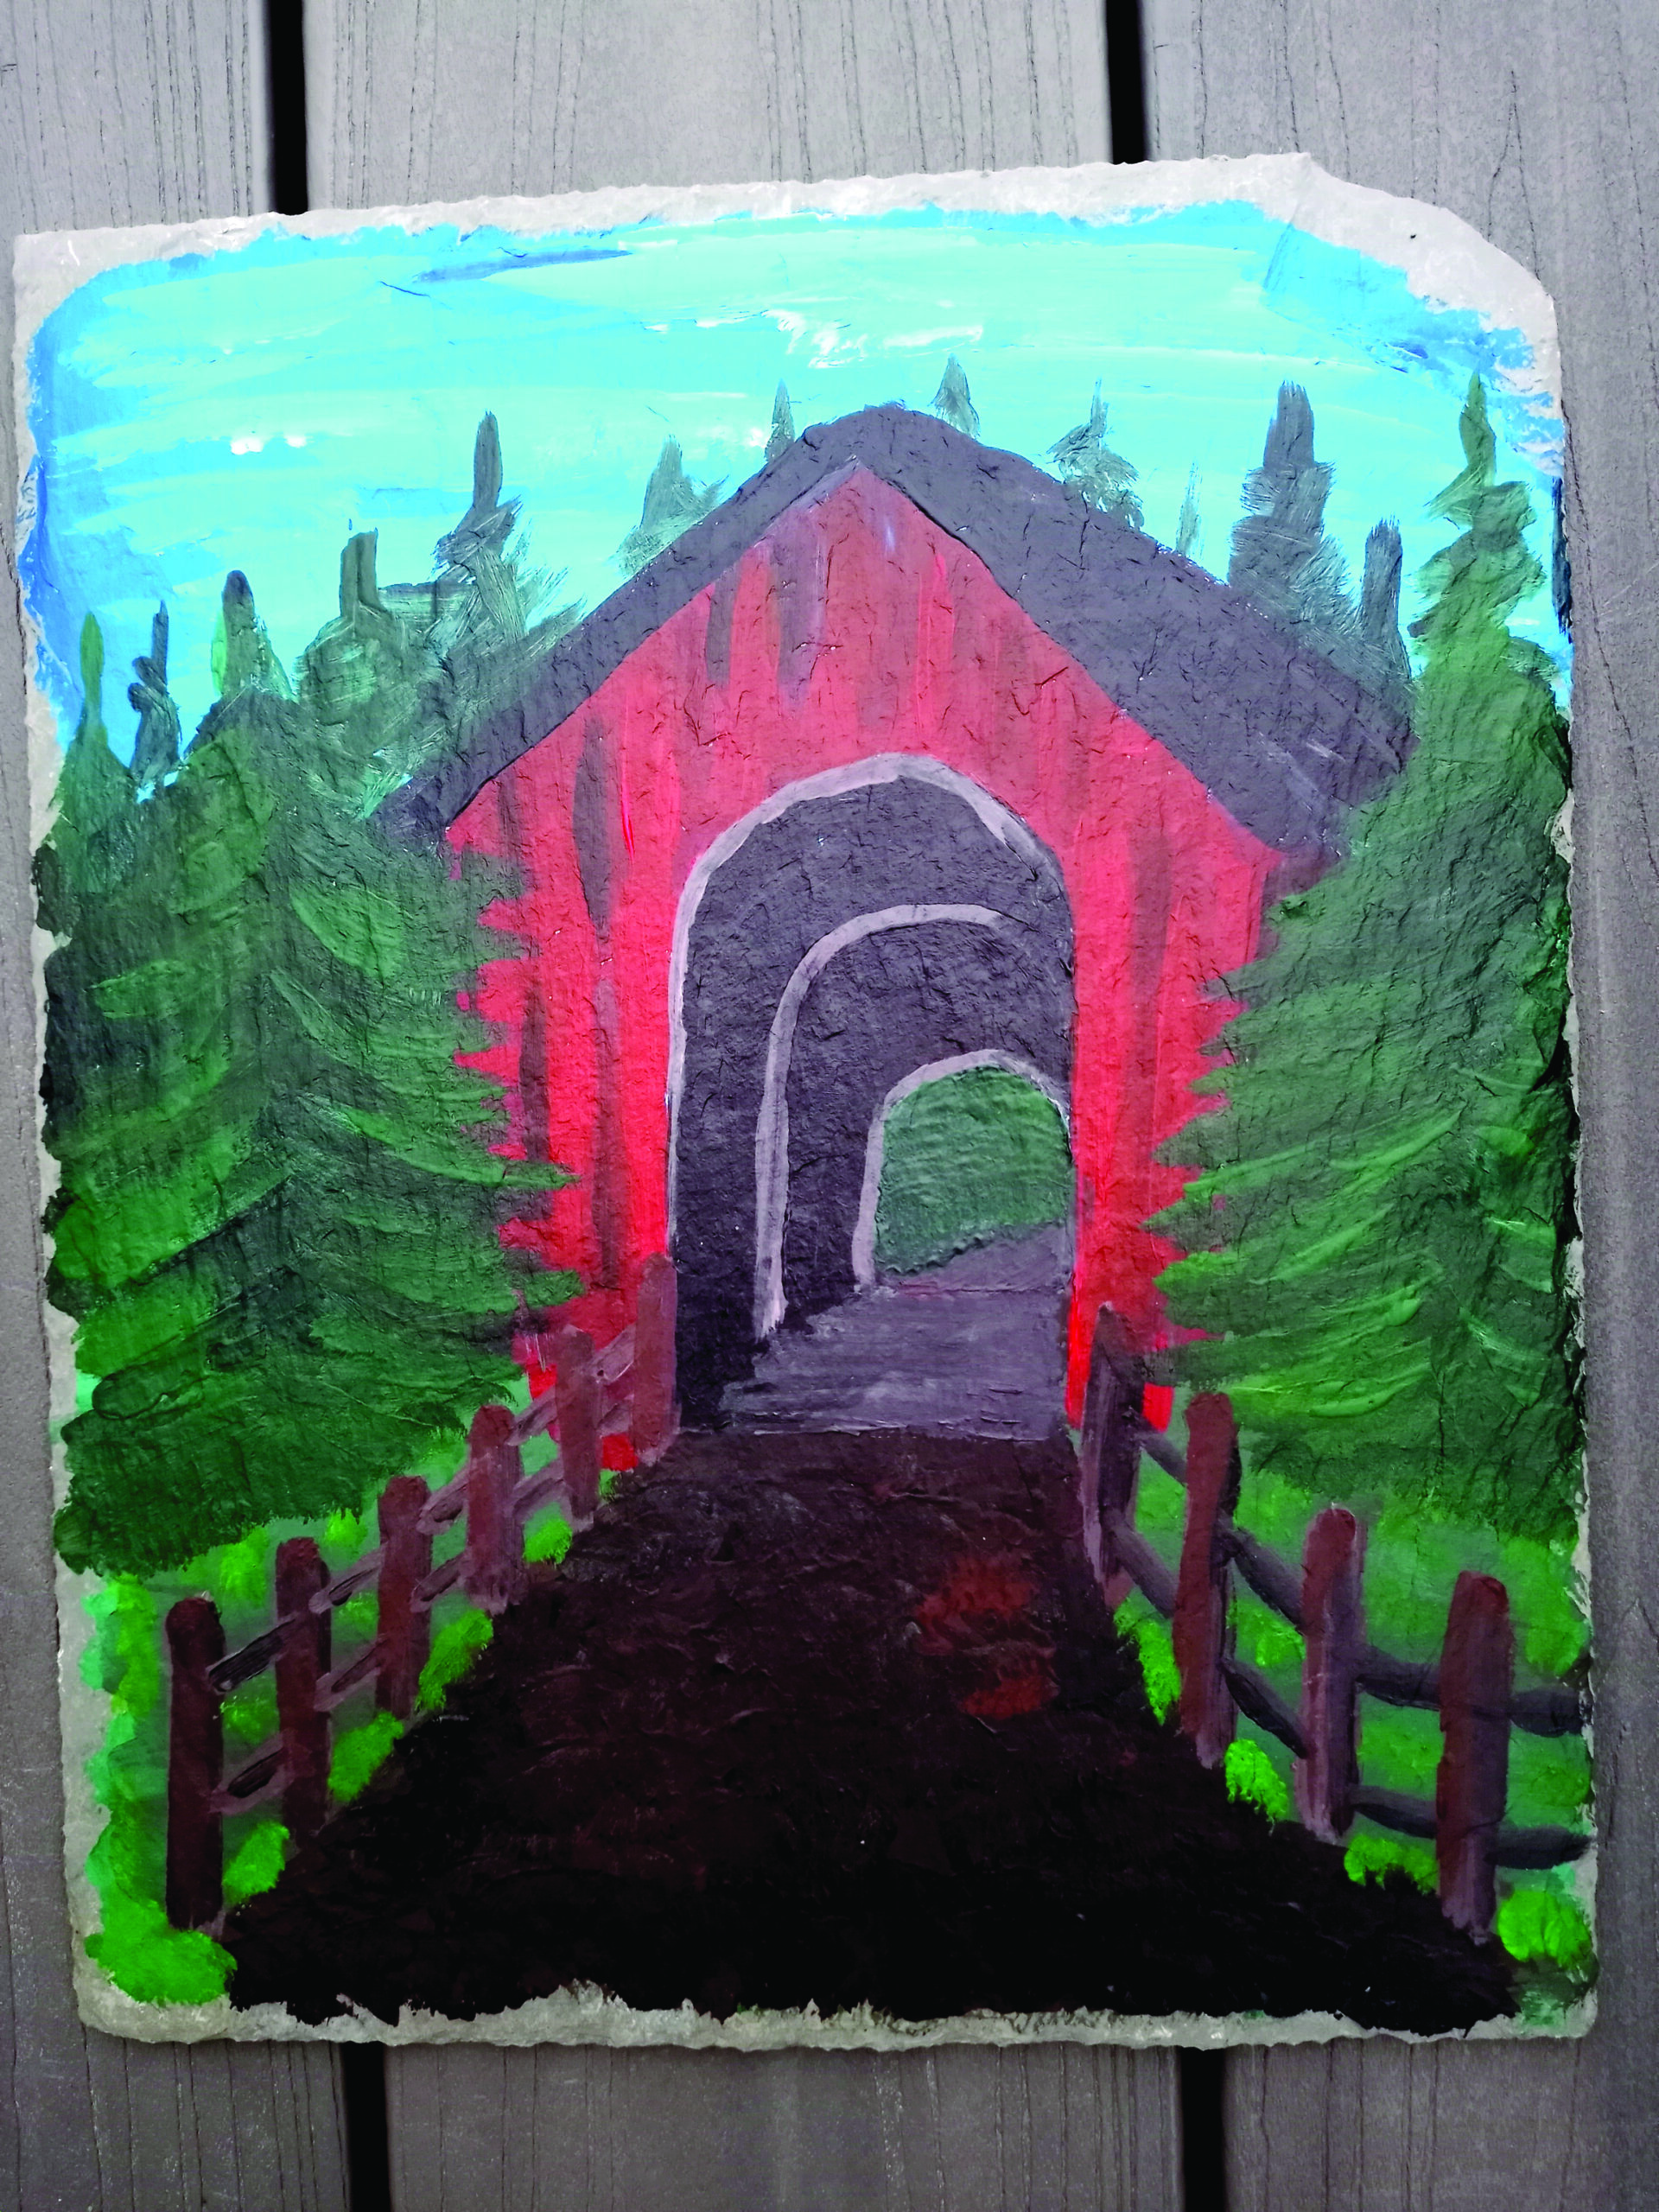 Sip and paint at Slate Valley Museum